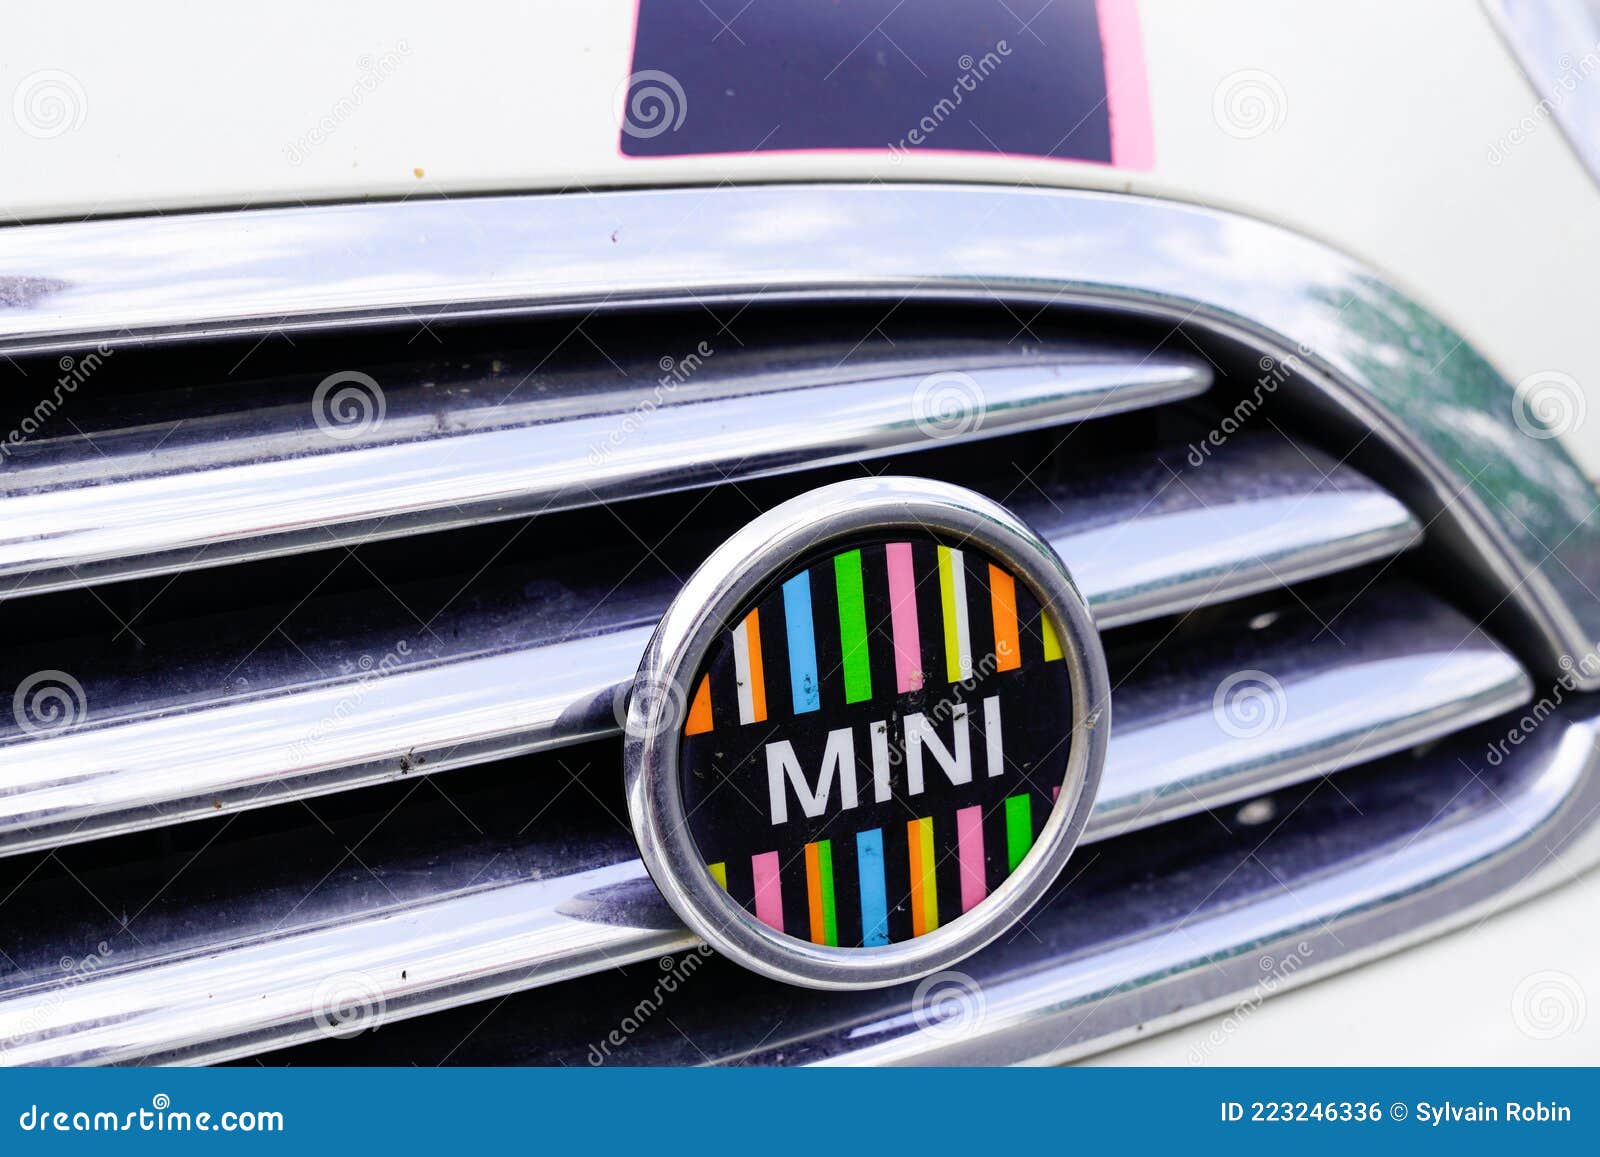 Mini Cooper Car Grille Limited Edition Logo Brand and Text Sign Design  Colors on Hatchback Editorial Photo - Image of hood, front: 223246336